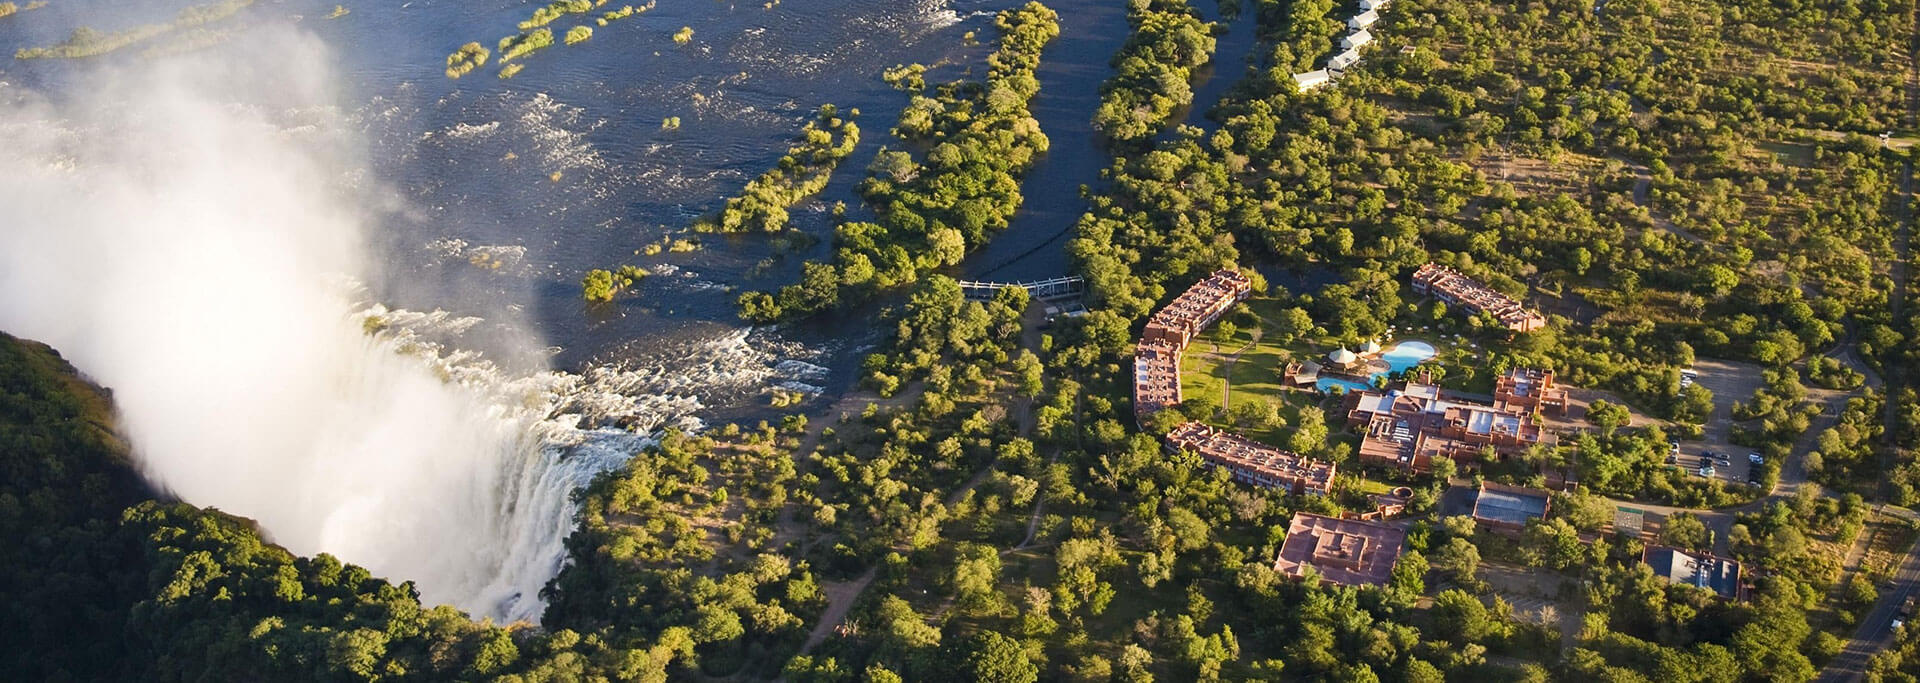 Aerial shot of the The Royal Livingstone Hotel and Victoria Falls